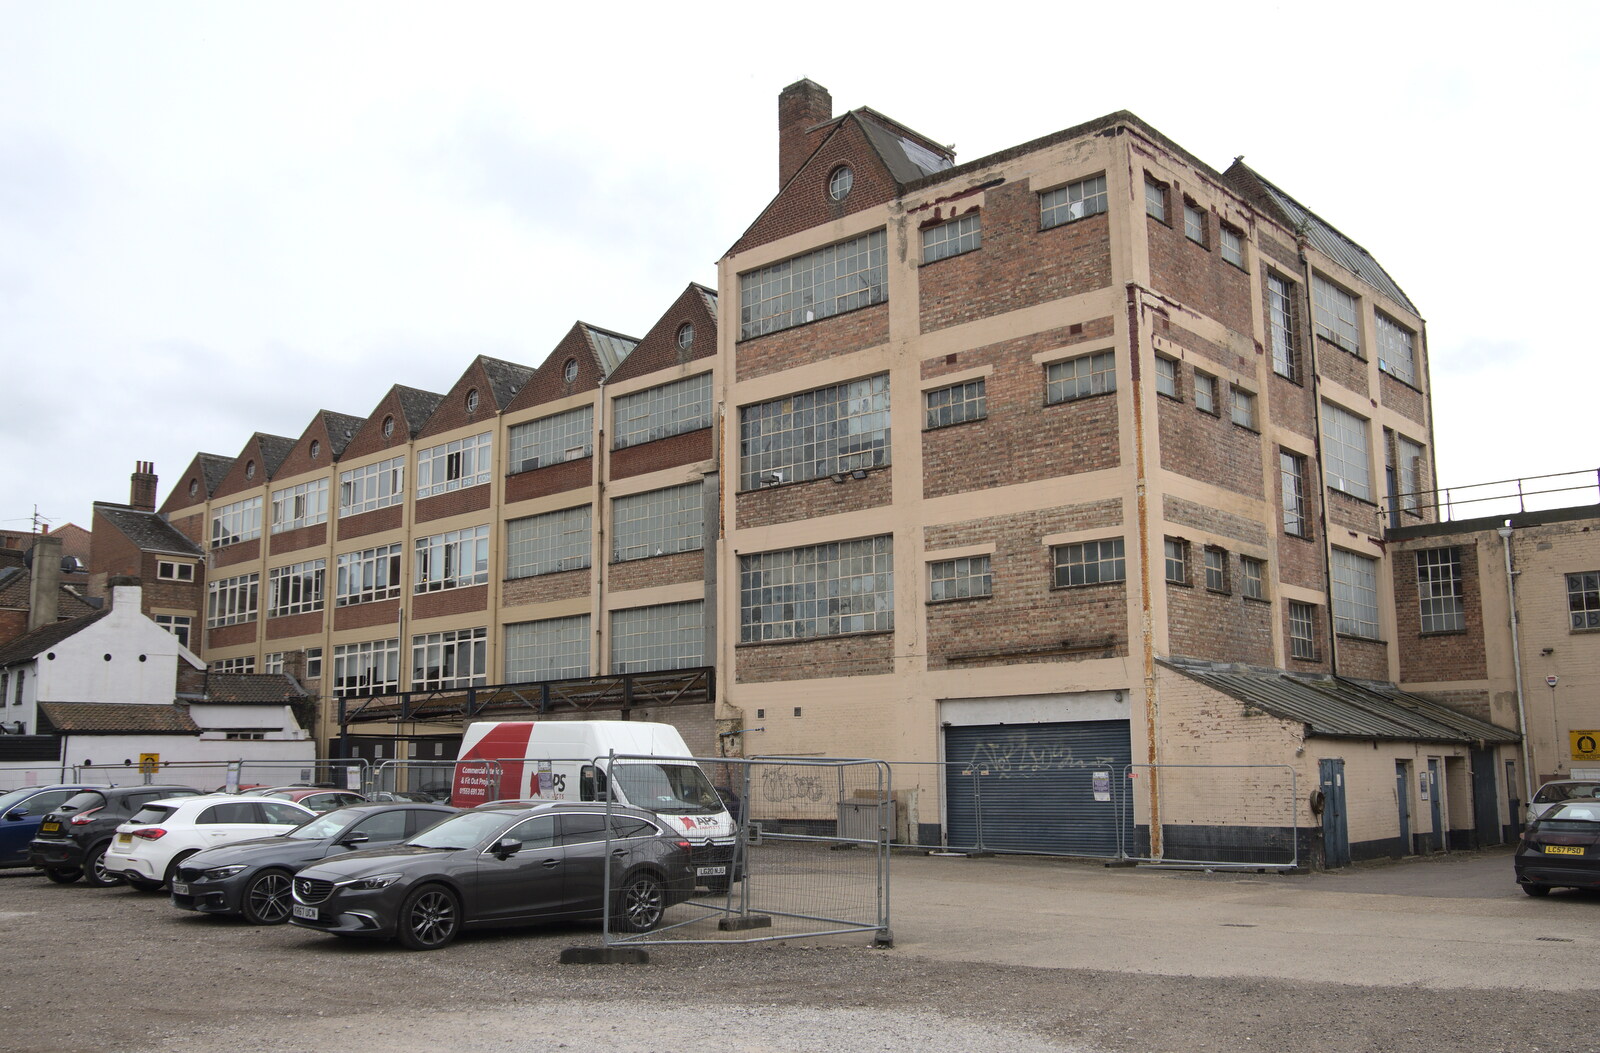 The back of St. George's Works from Discovering the Hidden City: Norwich, Norfolk - 23rd May 2022